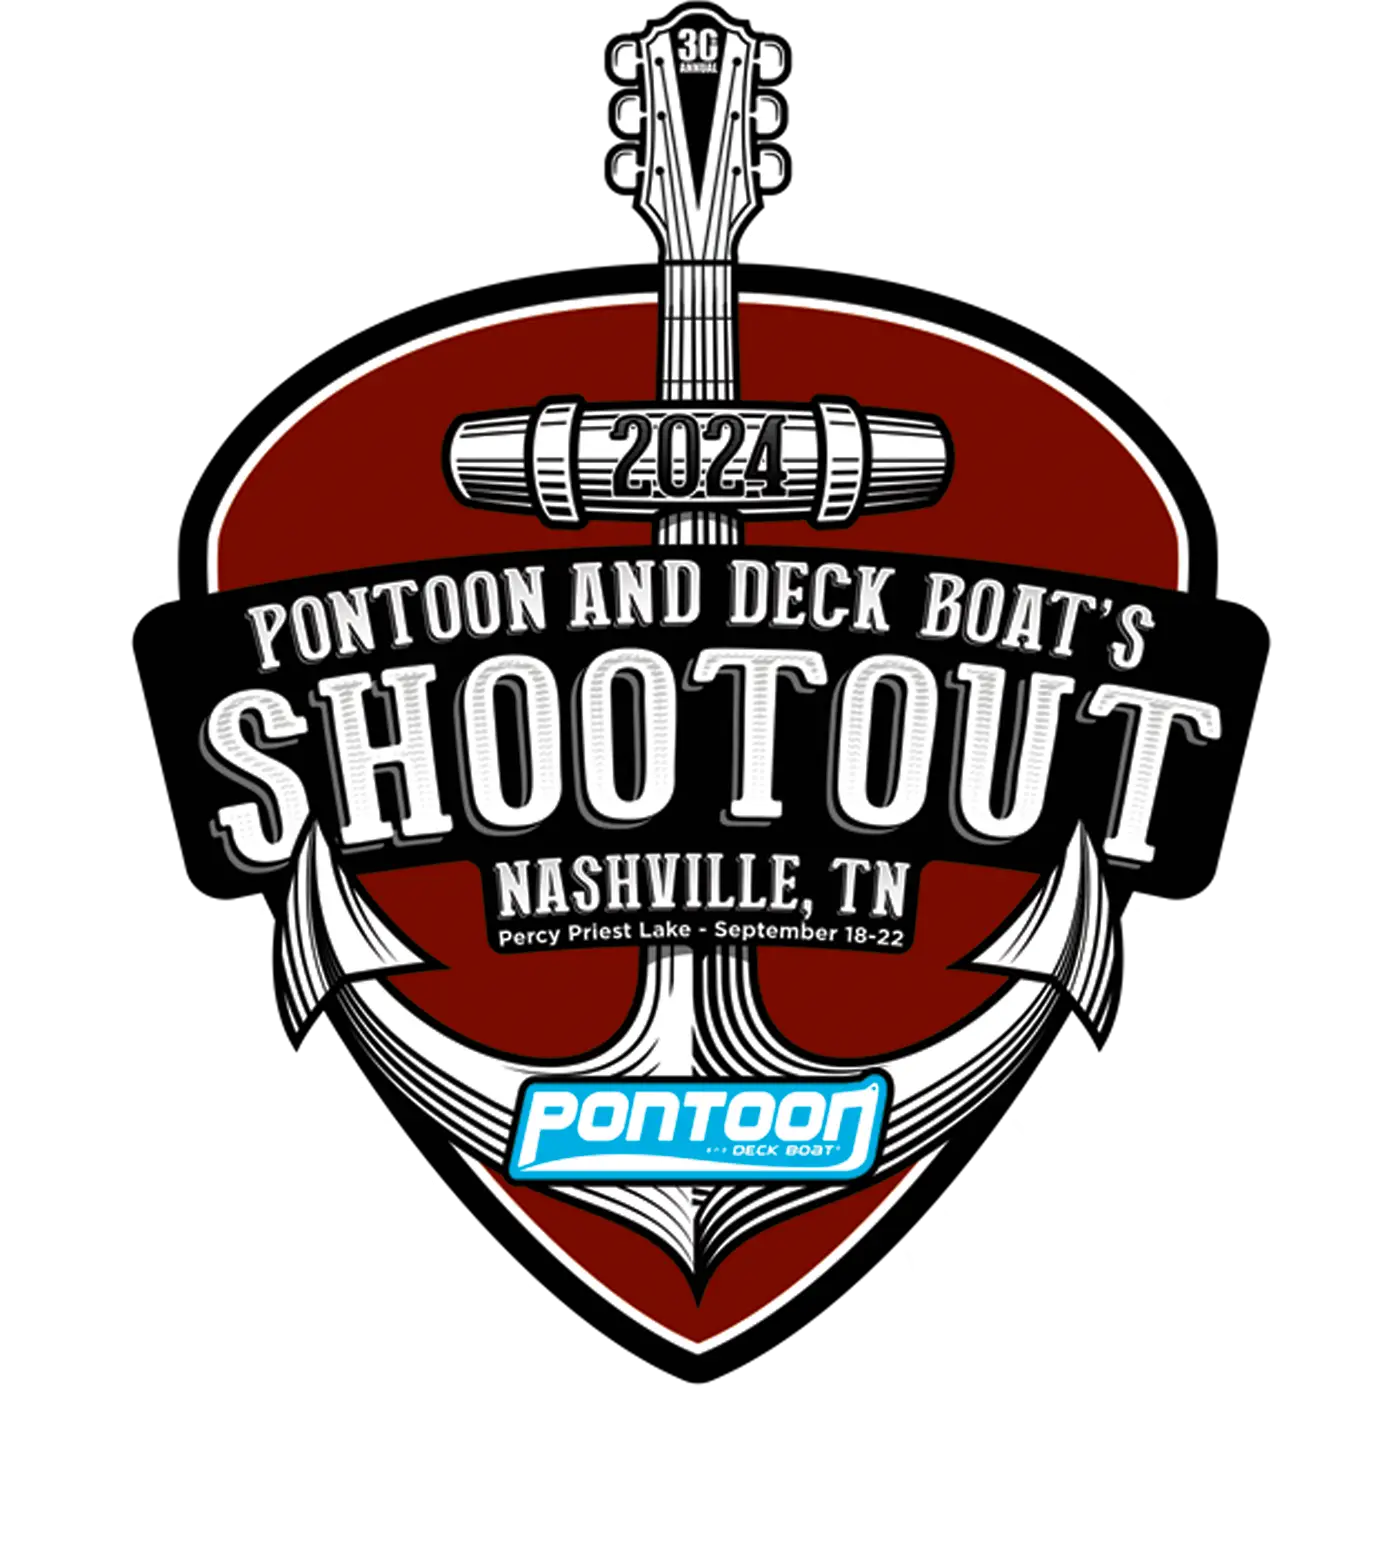 Pontoon and Deck Boat's Shootout logo